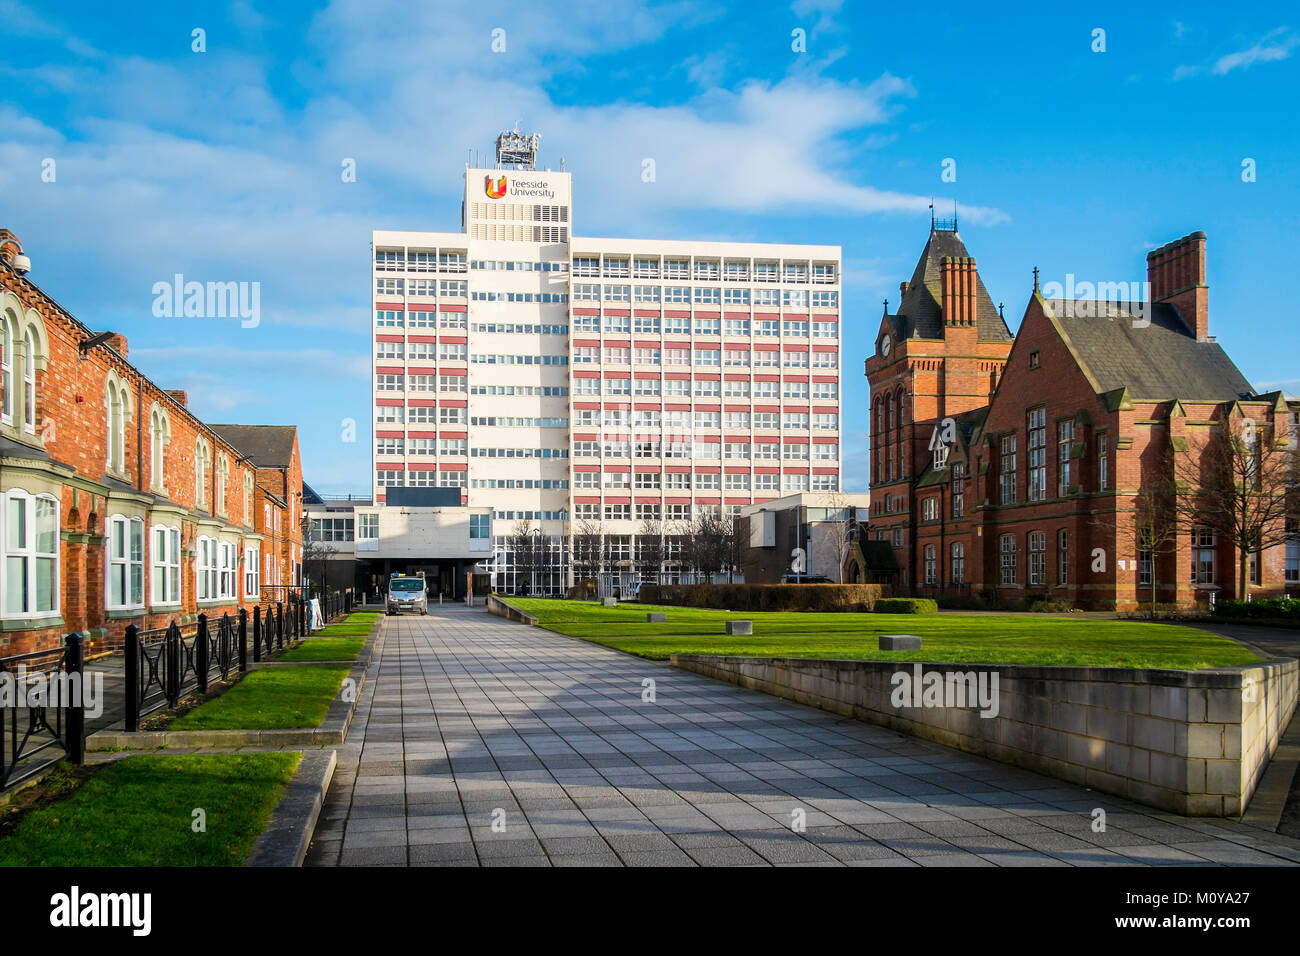 University of Teesside campus and buildings in Middlesbrough England UK Stock Photo